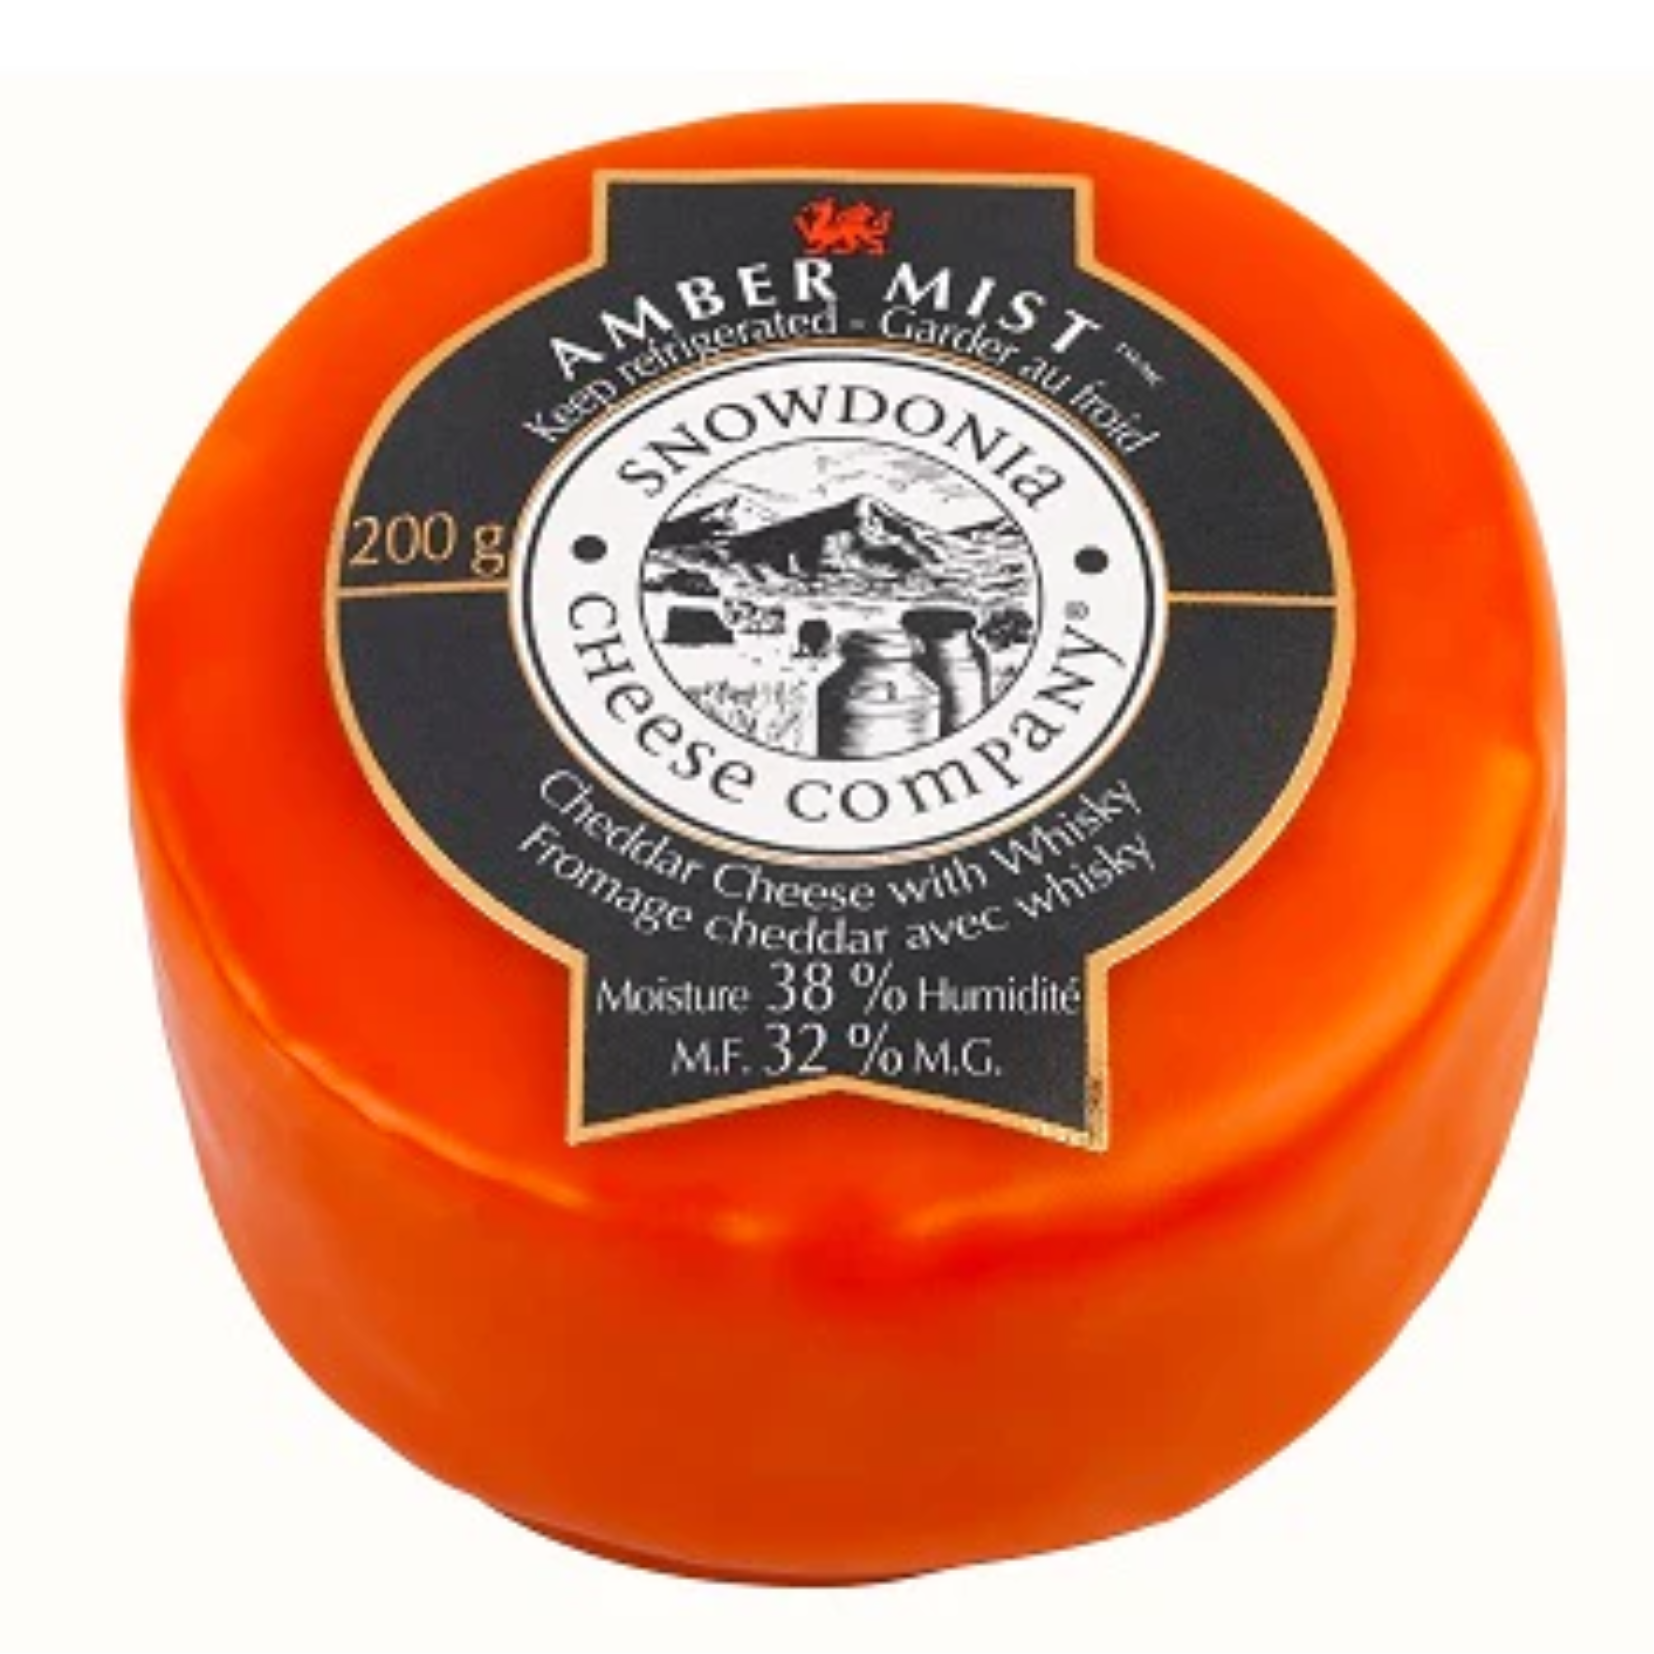 Snowdonia Amber Mist Cheddar Cheese With Whisky 200g